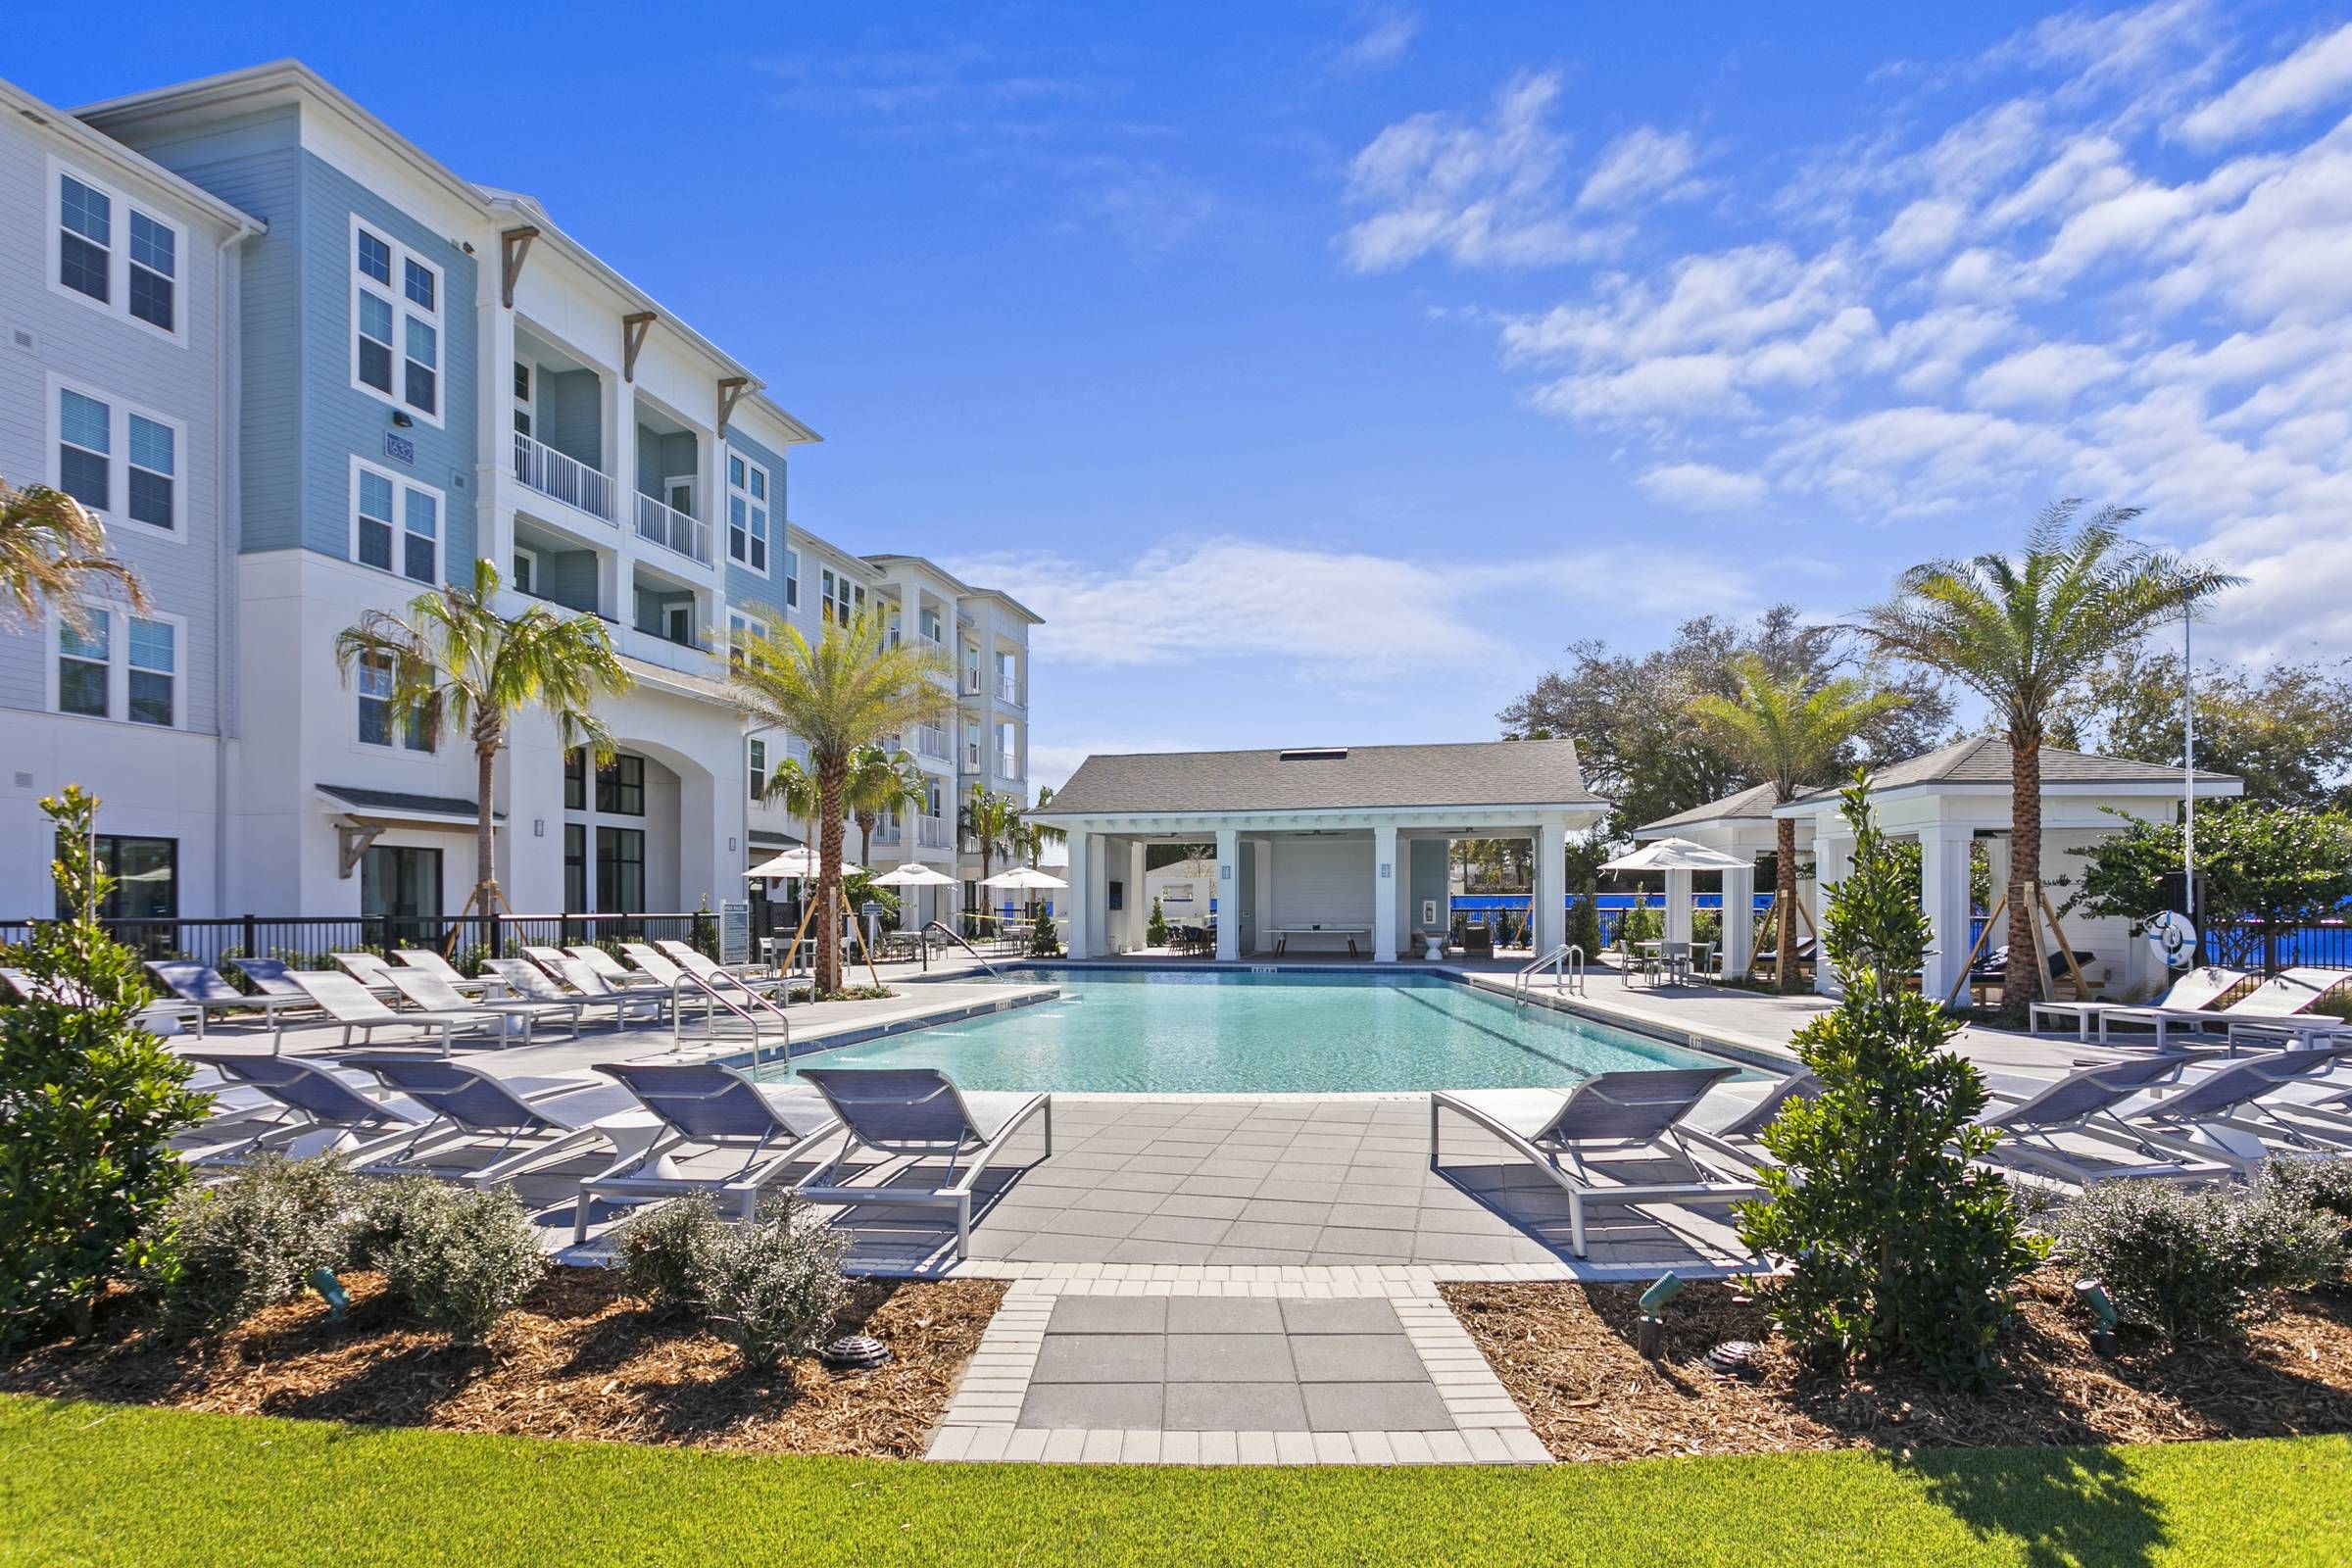 The inviting pool area at Alta Belleair is framed by stylish white loungers, green landscaping, and a contemporary outdoor pavilion under a sunny sky.